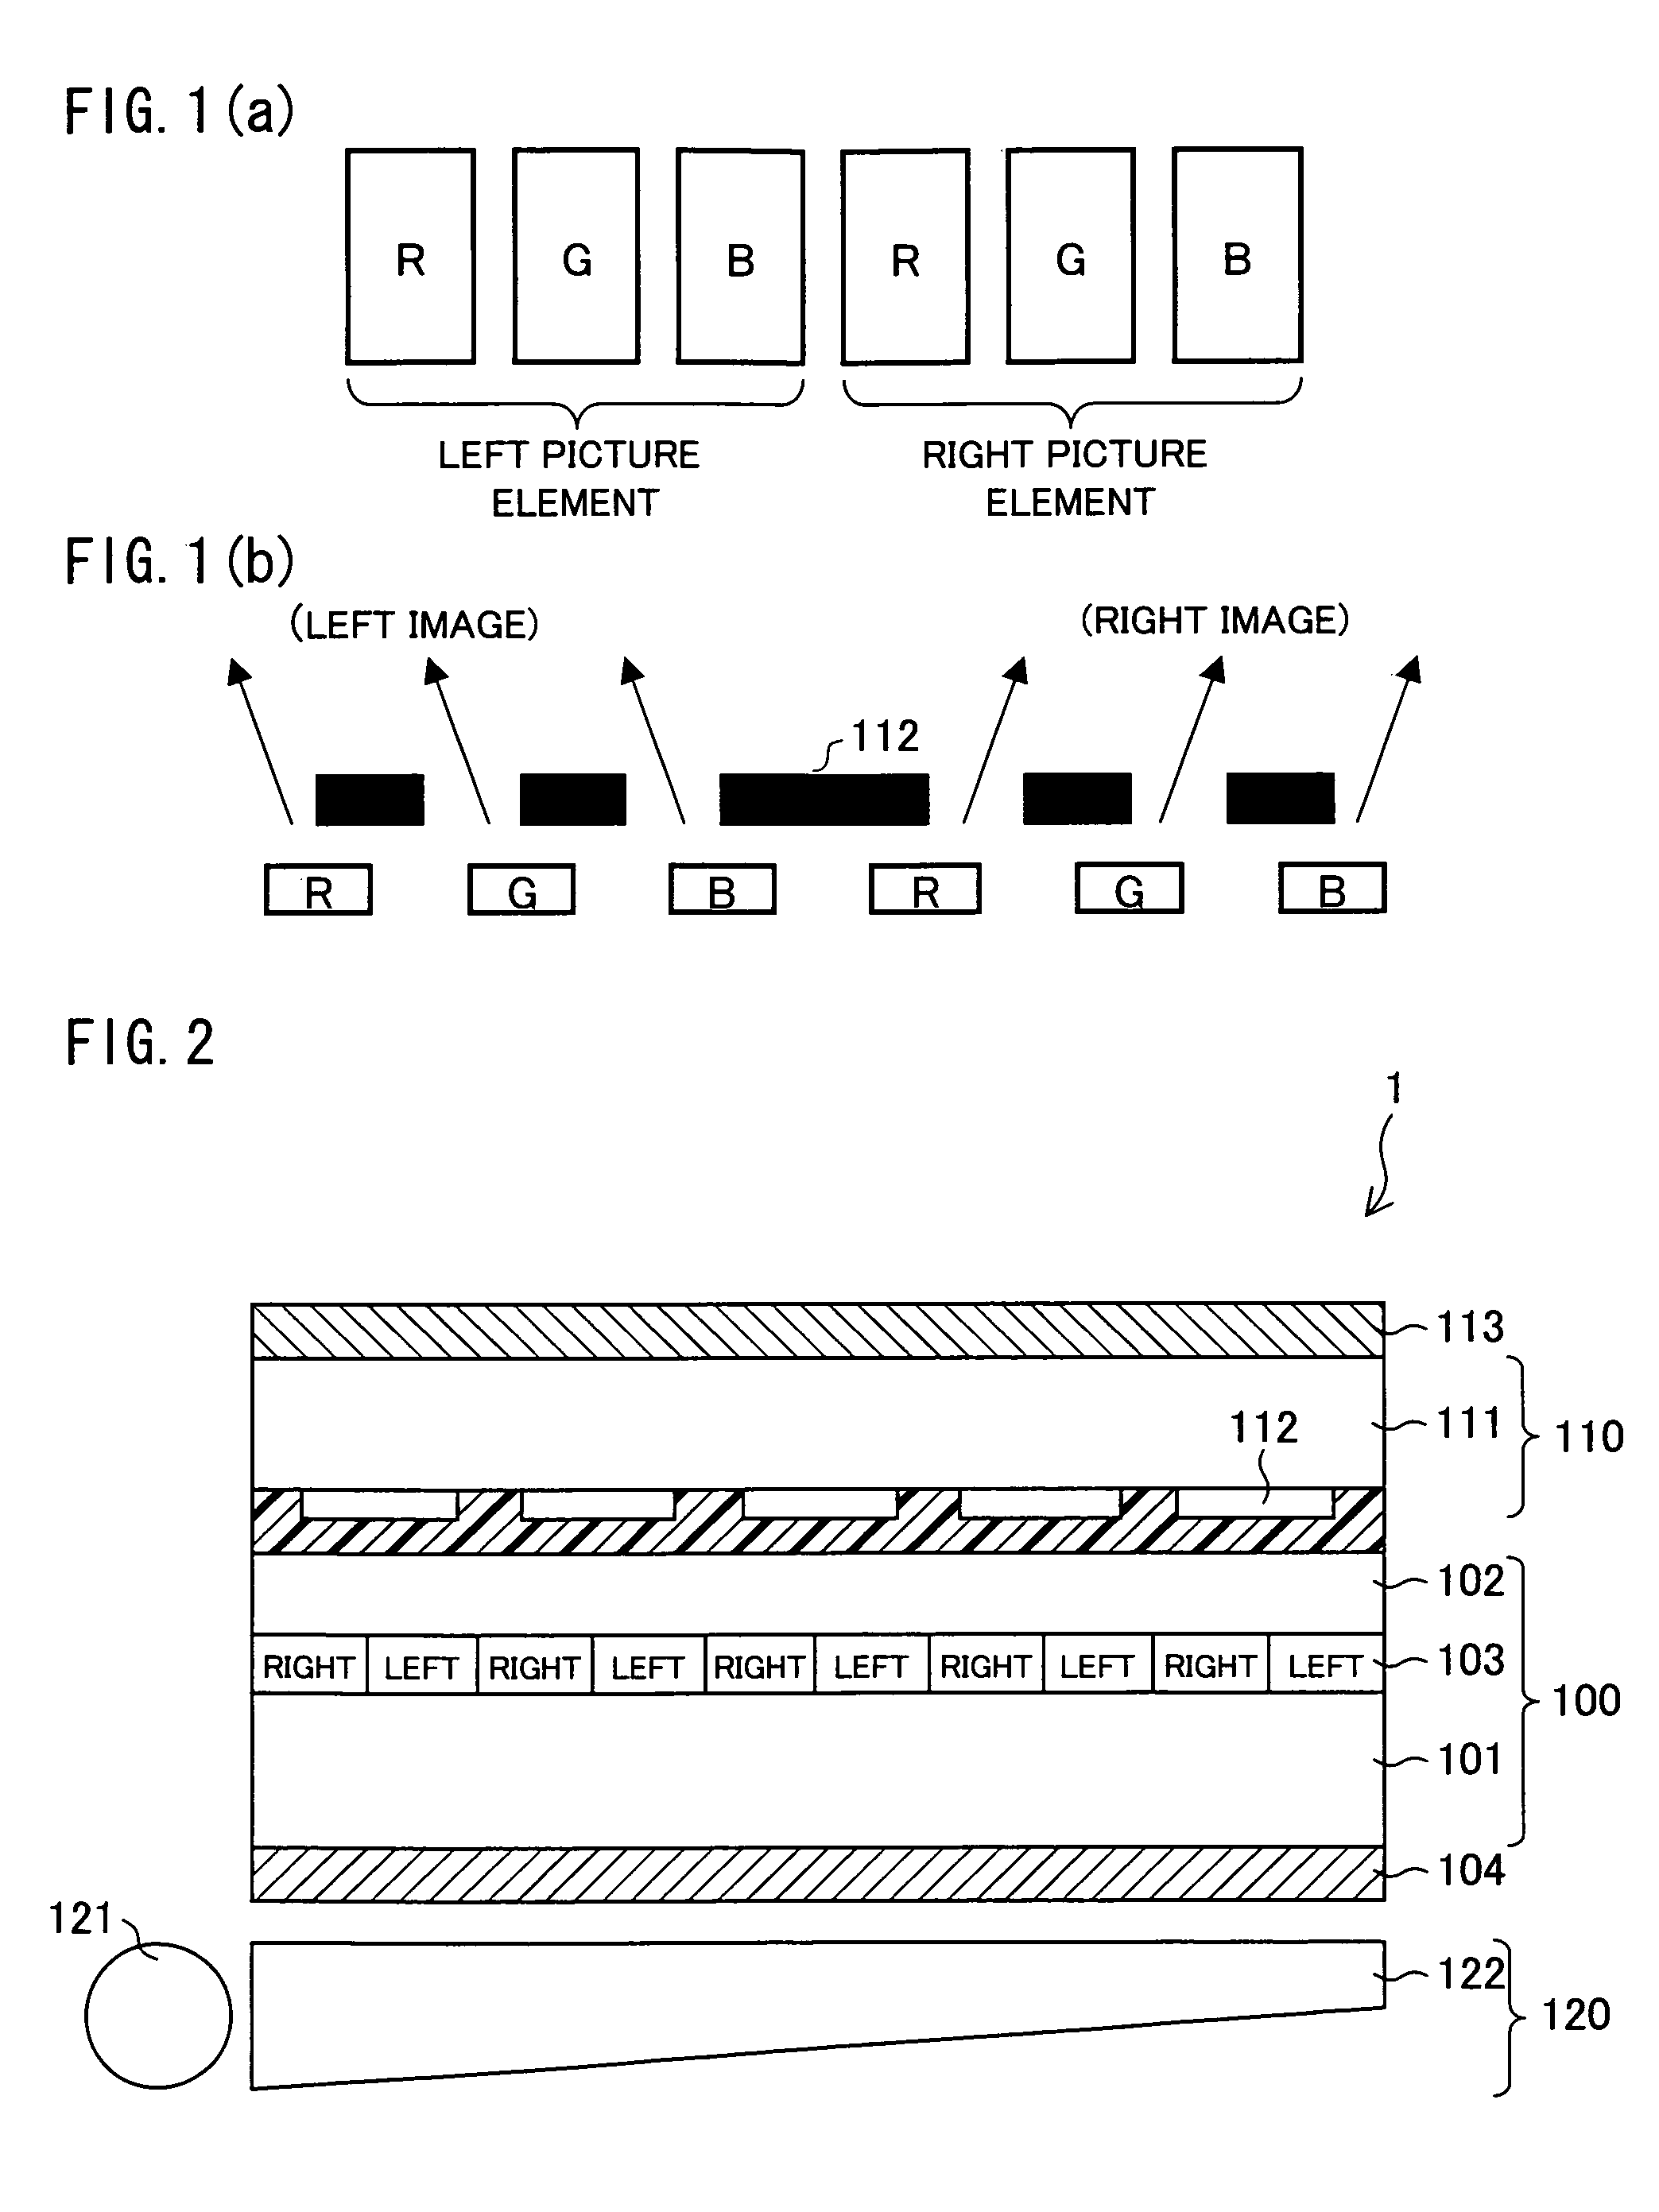 Liquid crystal display apparatus having an input gradation set to have a relationship along a gamma curve